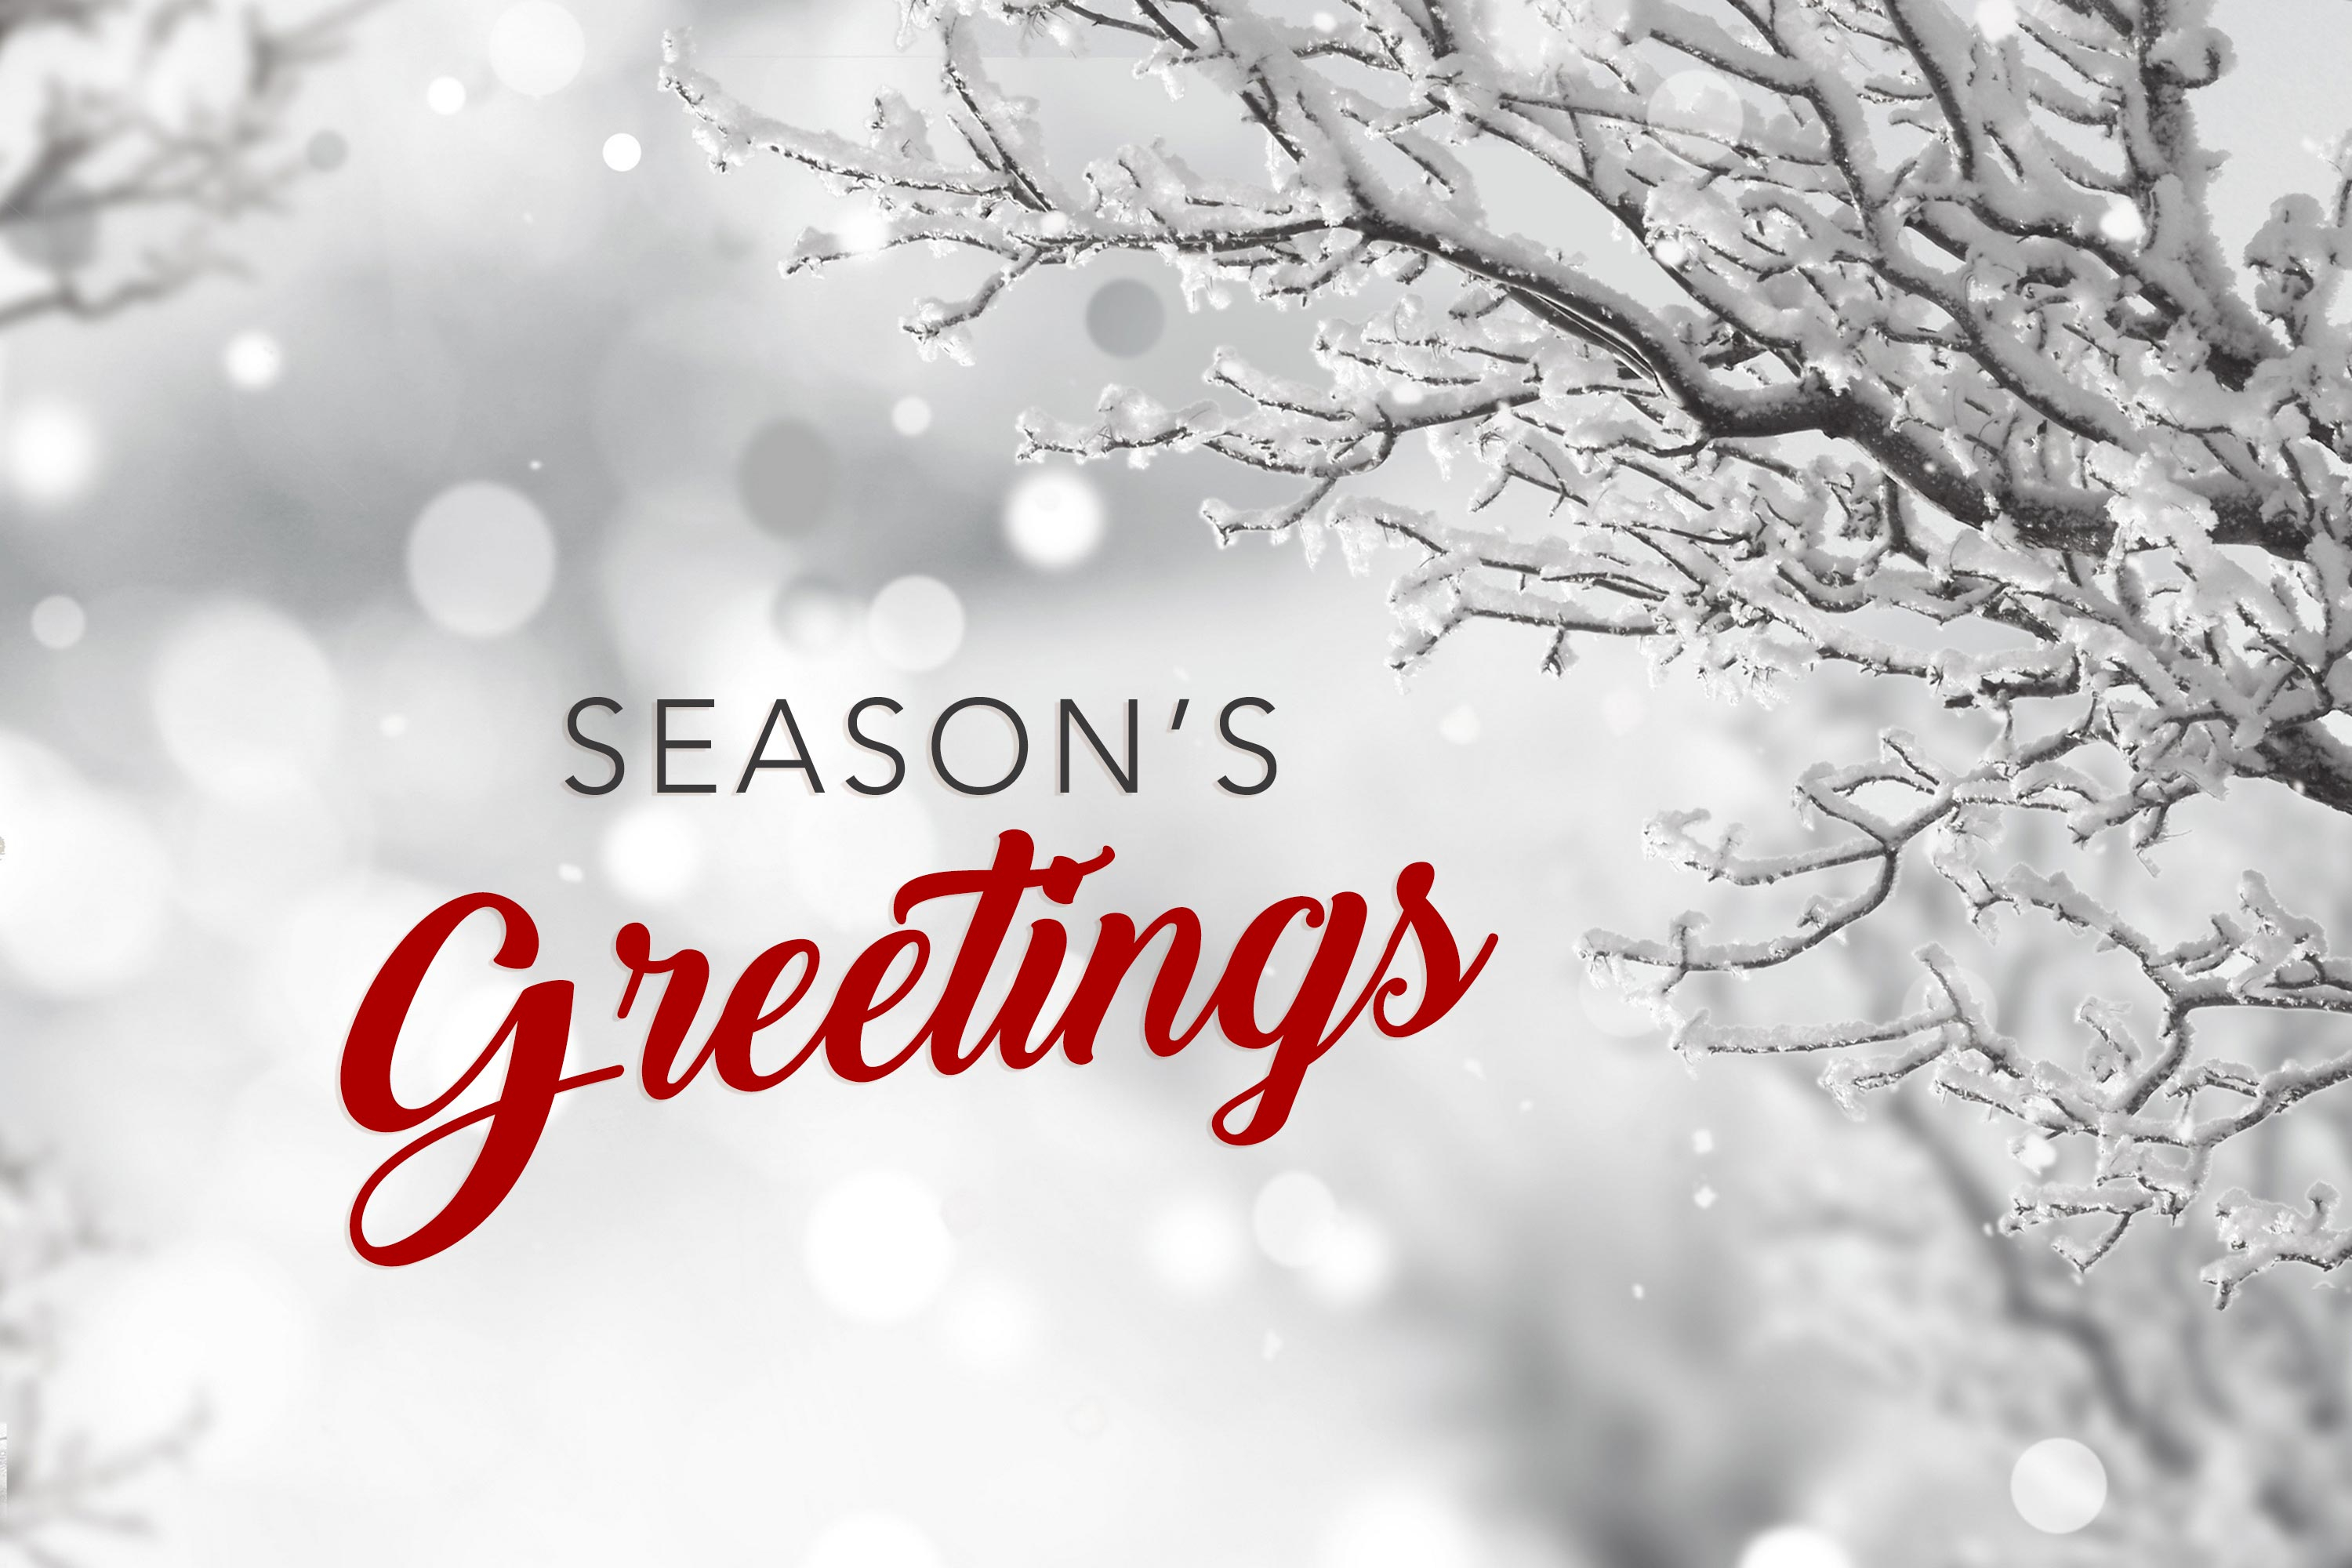 3000x2000 Free download 15 Seasons Greetings Cards Stock Images HD Wallpapers Winter [] for your Desktop, Mobile \u0026 Tablet | Explore 29+ Winter 2020 Wallpapers | 2020 Winter Wallpapers, Winter 2020 Wallpapers, Winter 2020 Hd Wallpapers